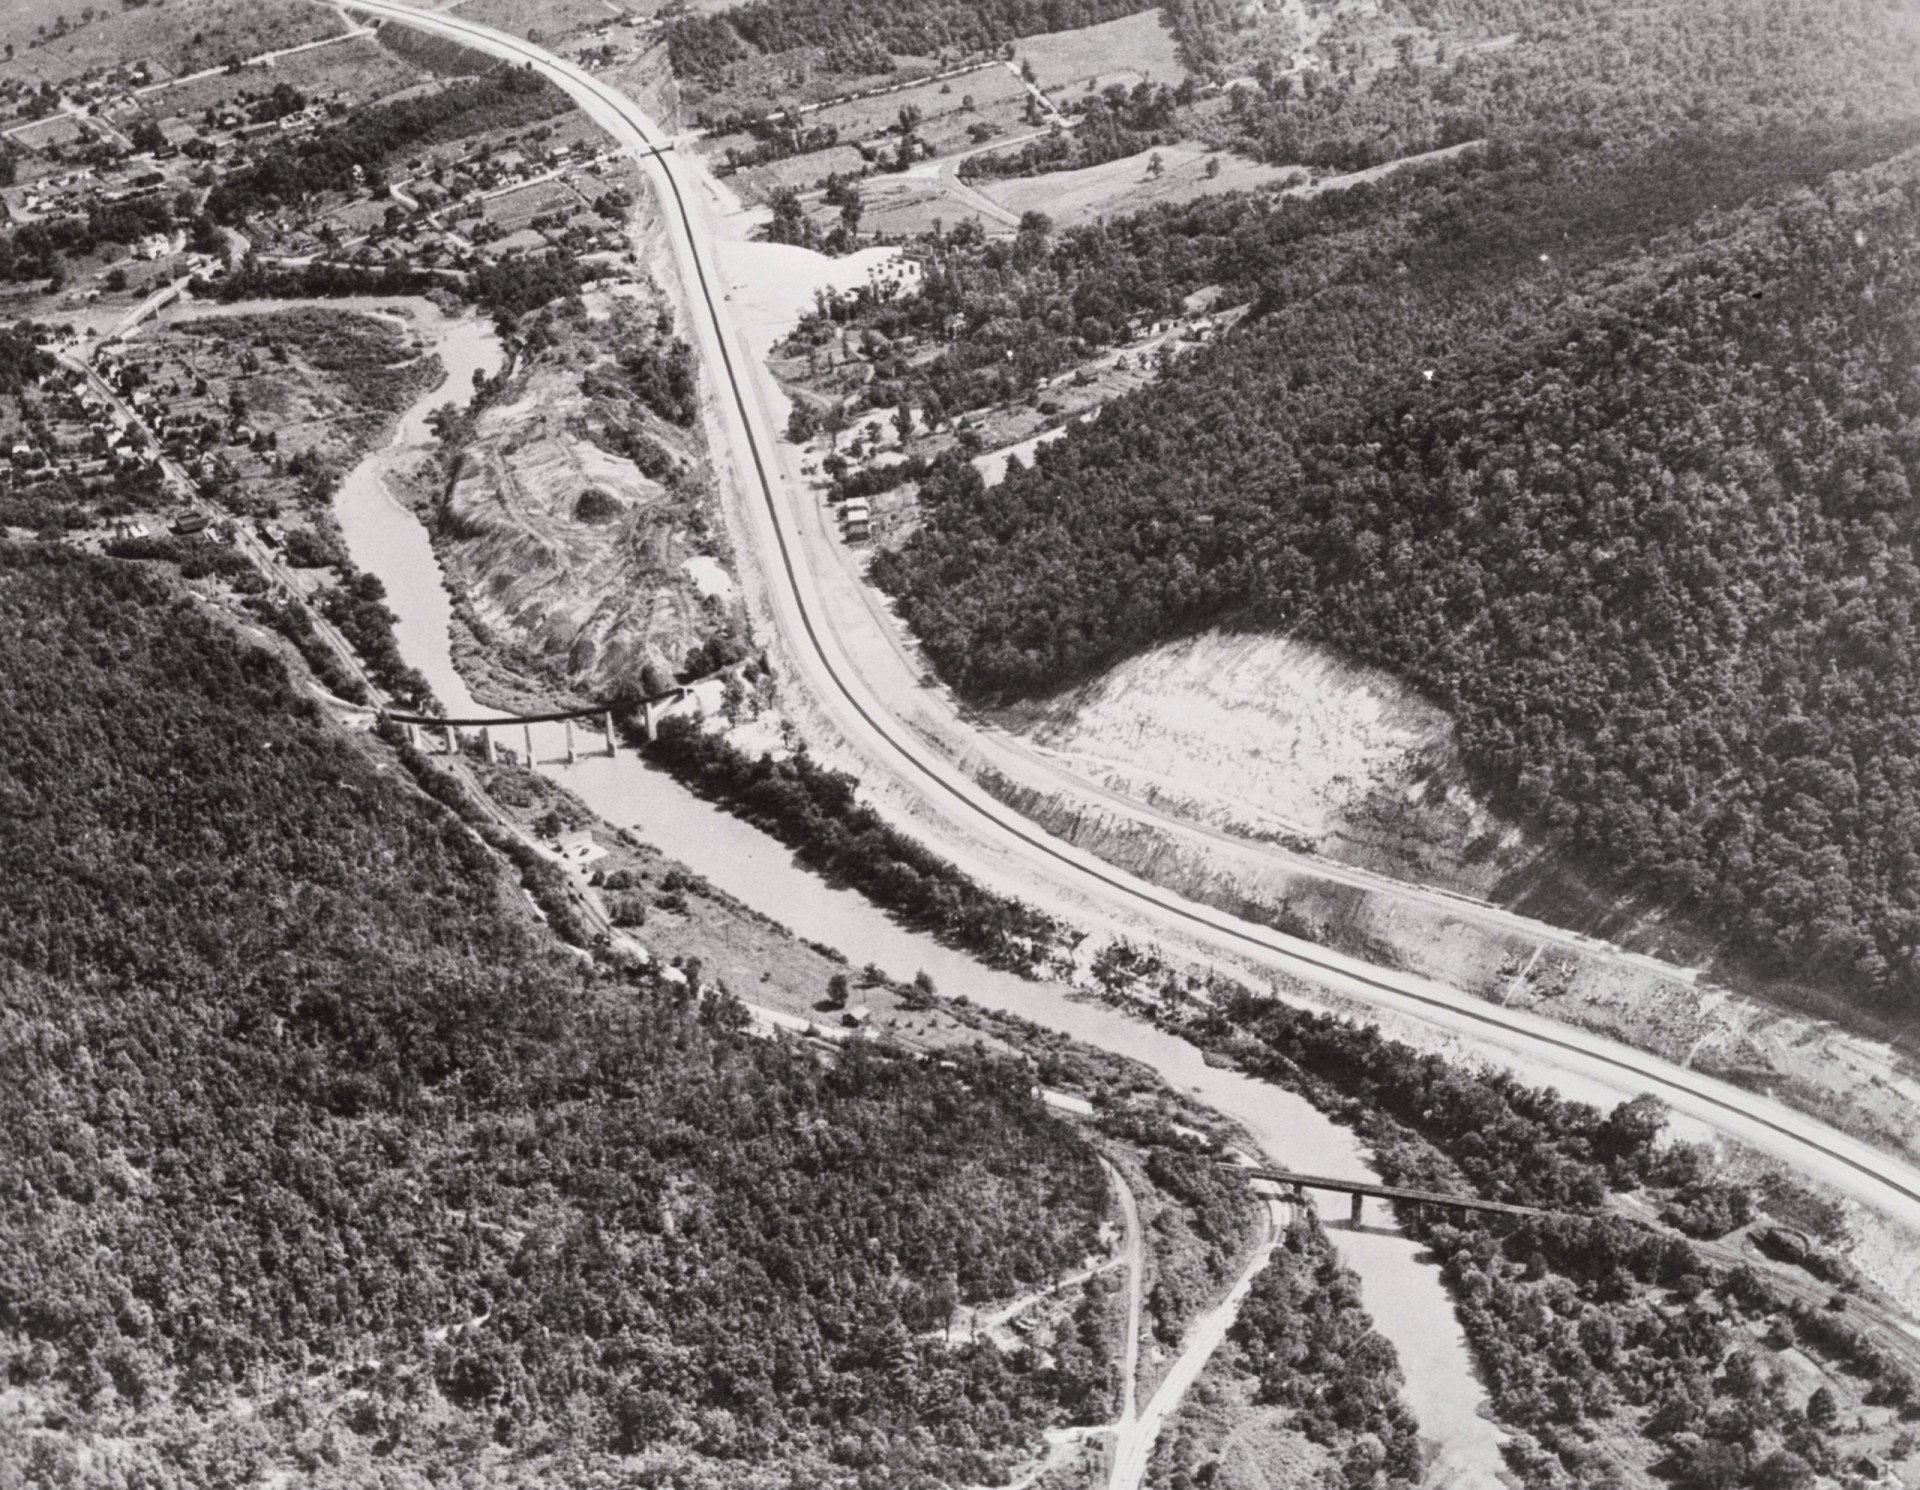 <p>Meanwhile, the four-lane Pennsylvania Turnpike was taking shape. Modeled after Germany's autobahns, the road was one of the earliest long-distance, limited-access highways in the United States and served as a precedent for additional limited-access toll roads and the Interstate Highway System.</p><p>You may also like:<a href="https://www.starsinsider.com/n/414200?utm_source=msn.com&utm_medium=display&utm_campaign=referral_description&utm_content=697904en-us"> Celebs accused of homophobia and transphobia </a></p>